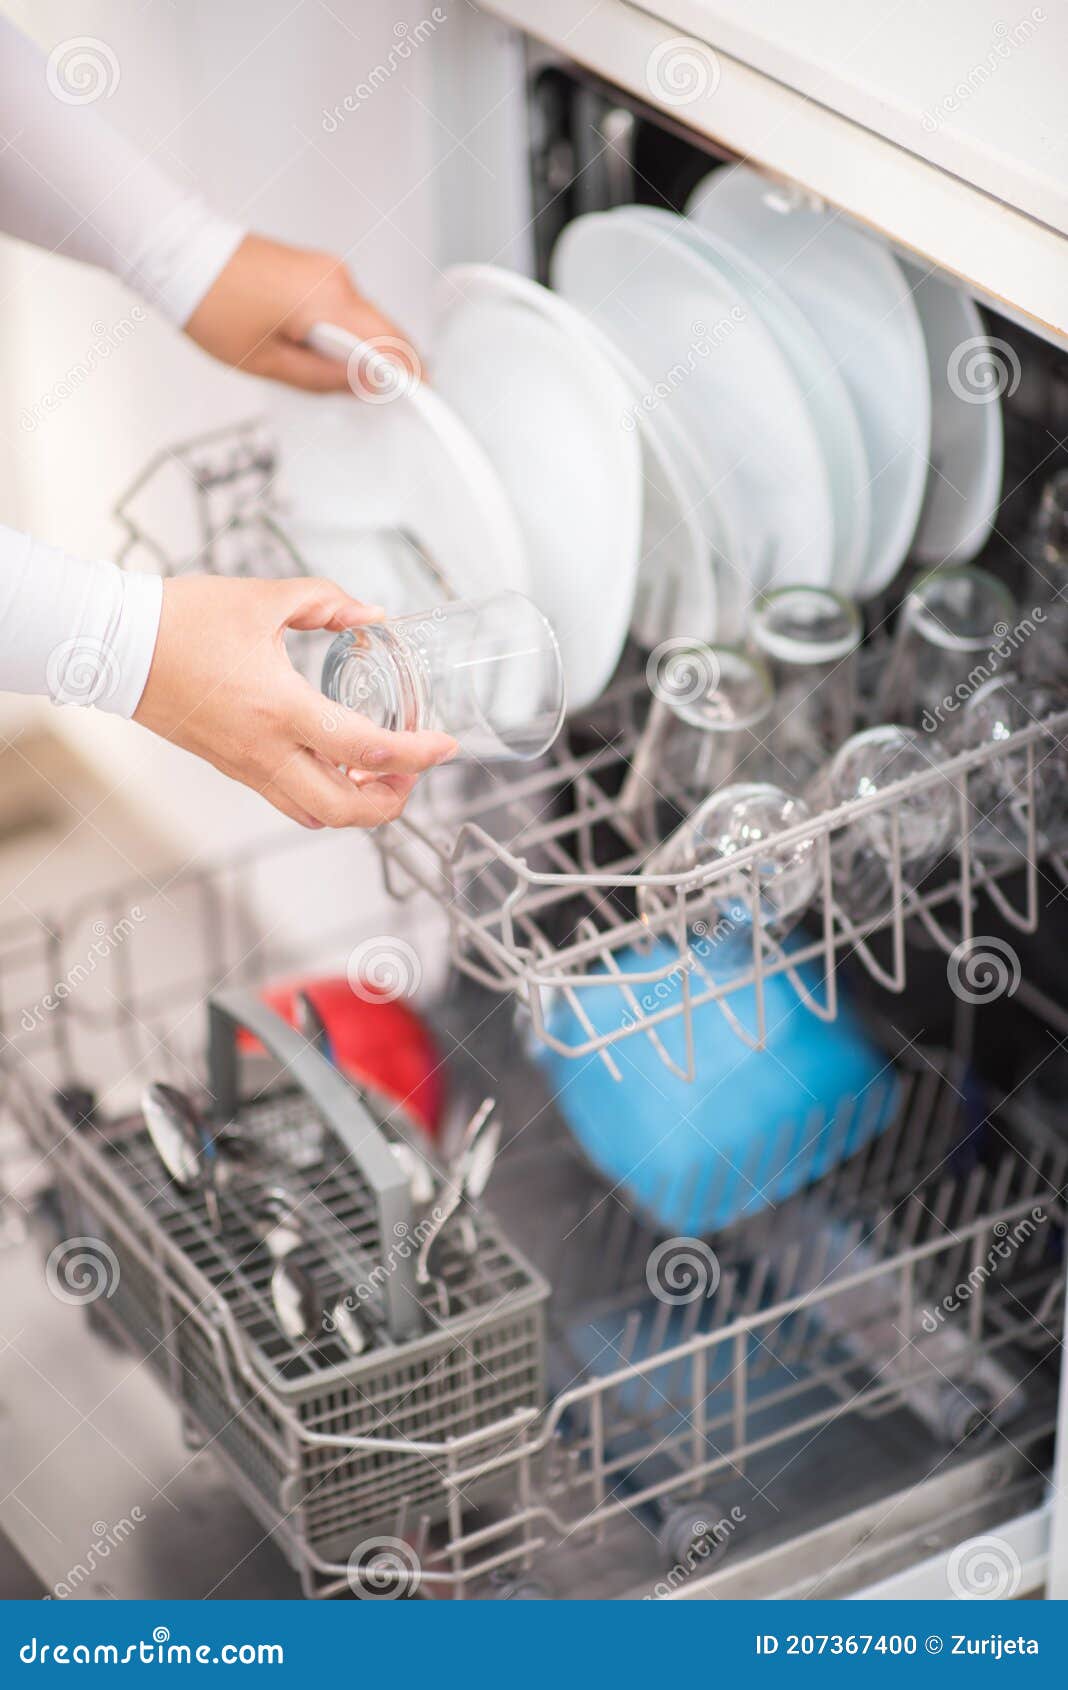 open dishwasher with clean glass and dishes